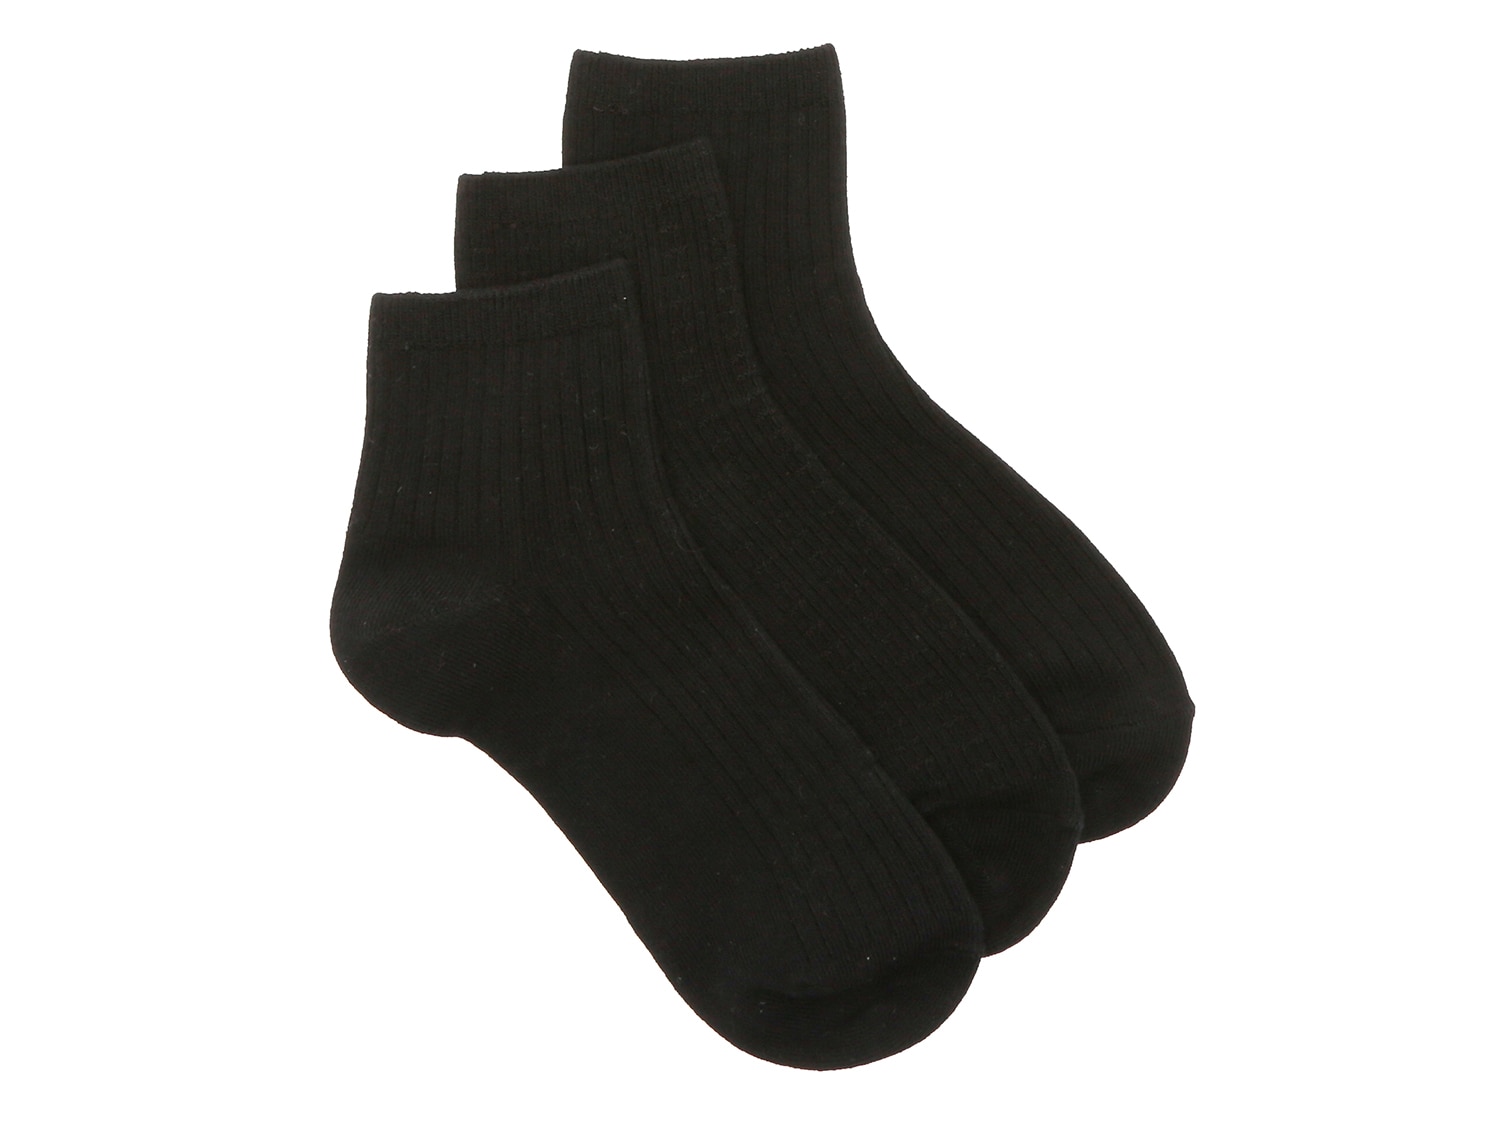 Crown Vintage Solid Women's Ankle Socks - 5 Pack - Free Shipping